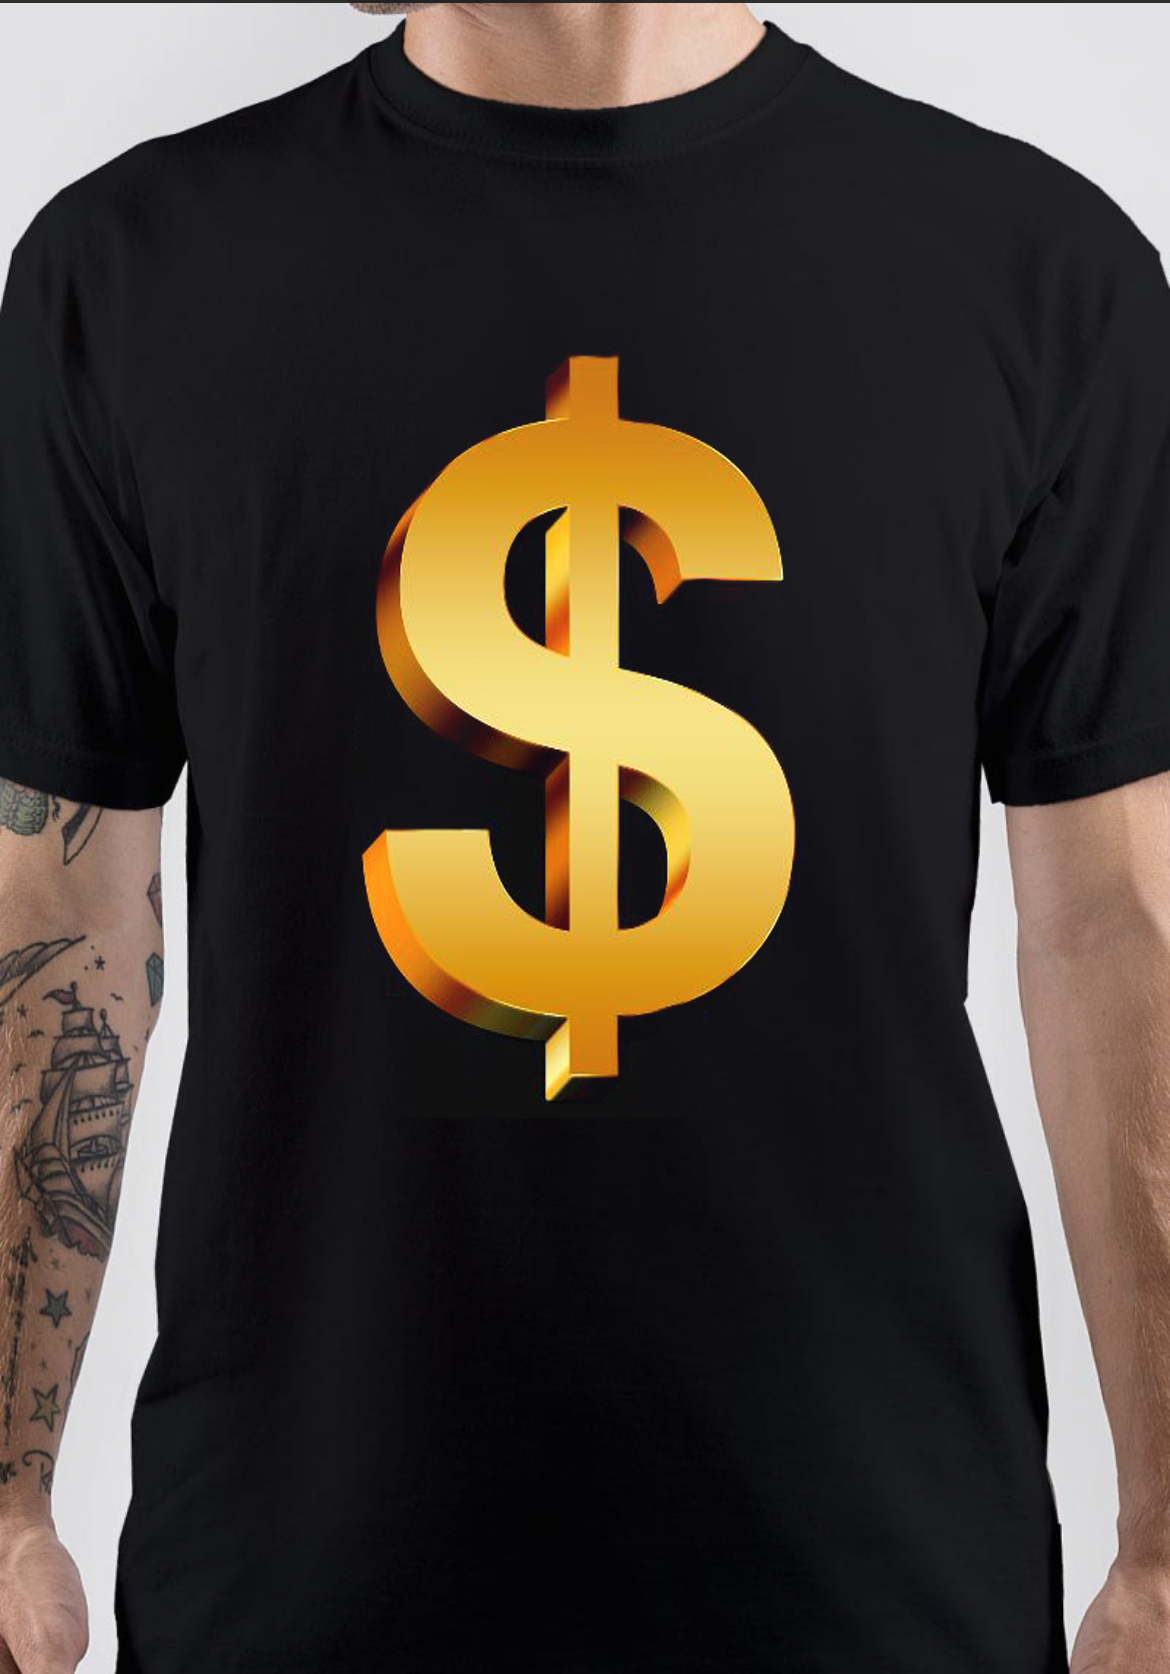 Ty Dolla $ign T-Shirt And Merchandise